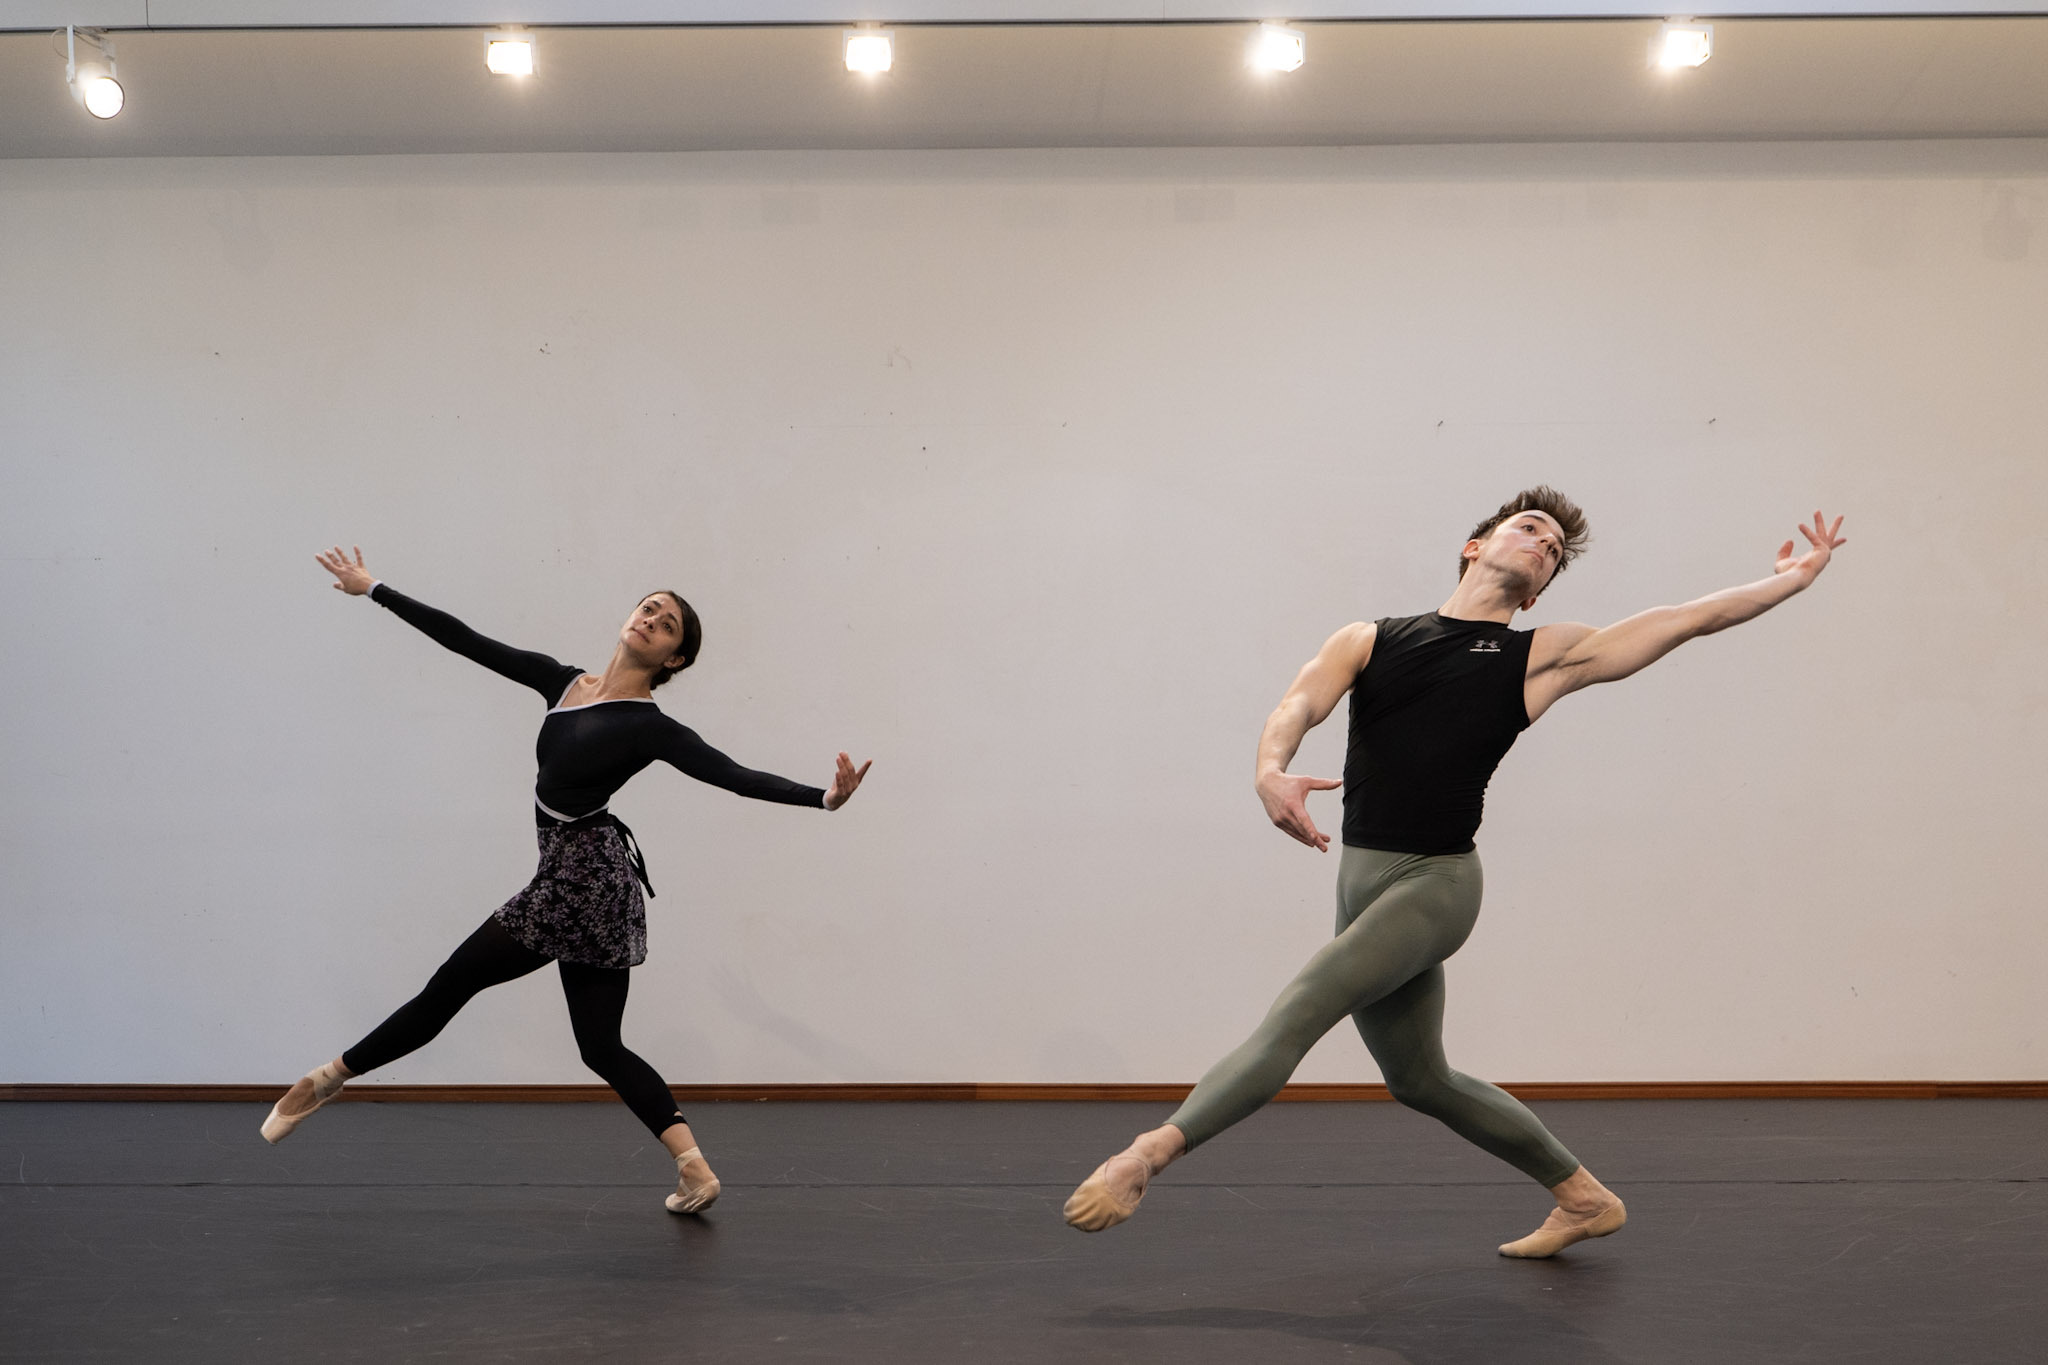 Lauren Bonfiglio and Tyler Maloney from Hamptons Dance Project in rehearsal at the Guild Hall William P. Rayner Artist-in-Residence studio. © JOE BRONDO FOR GUILD HALL